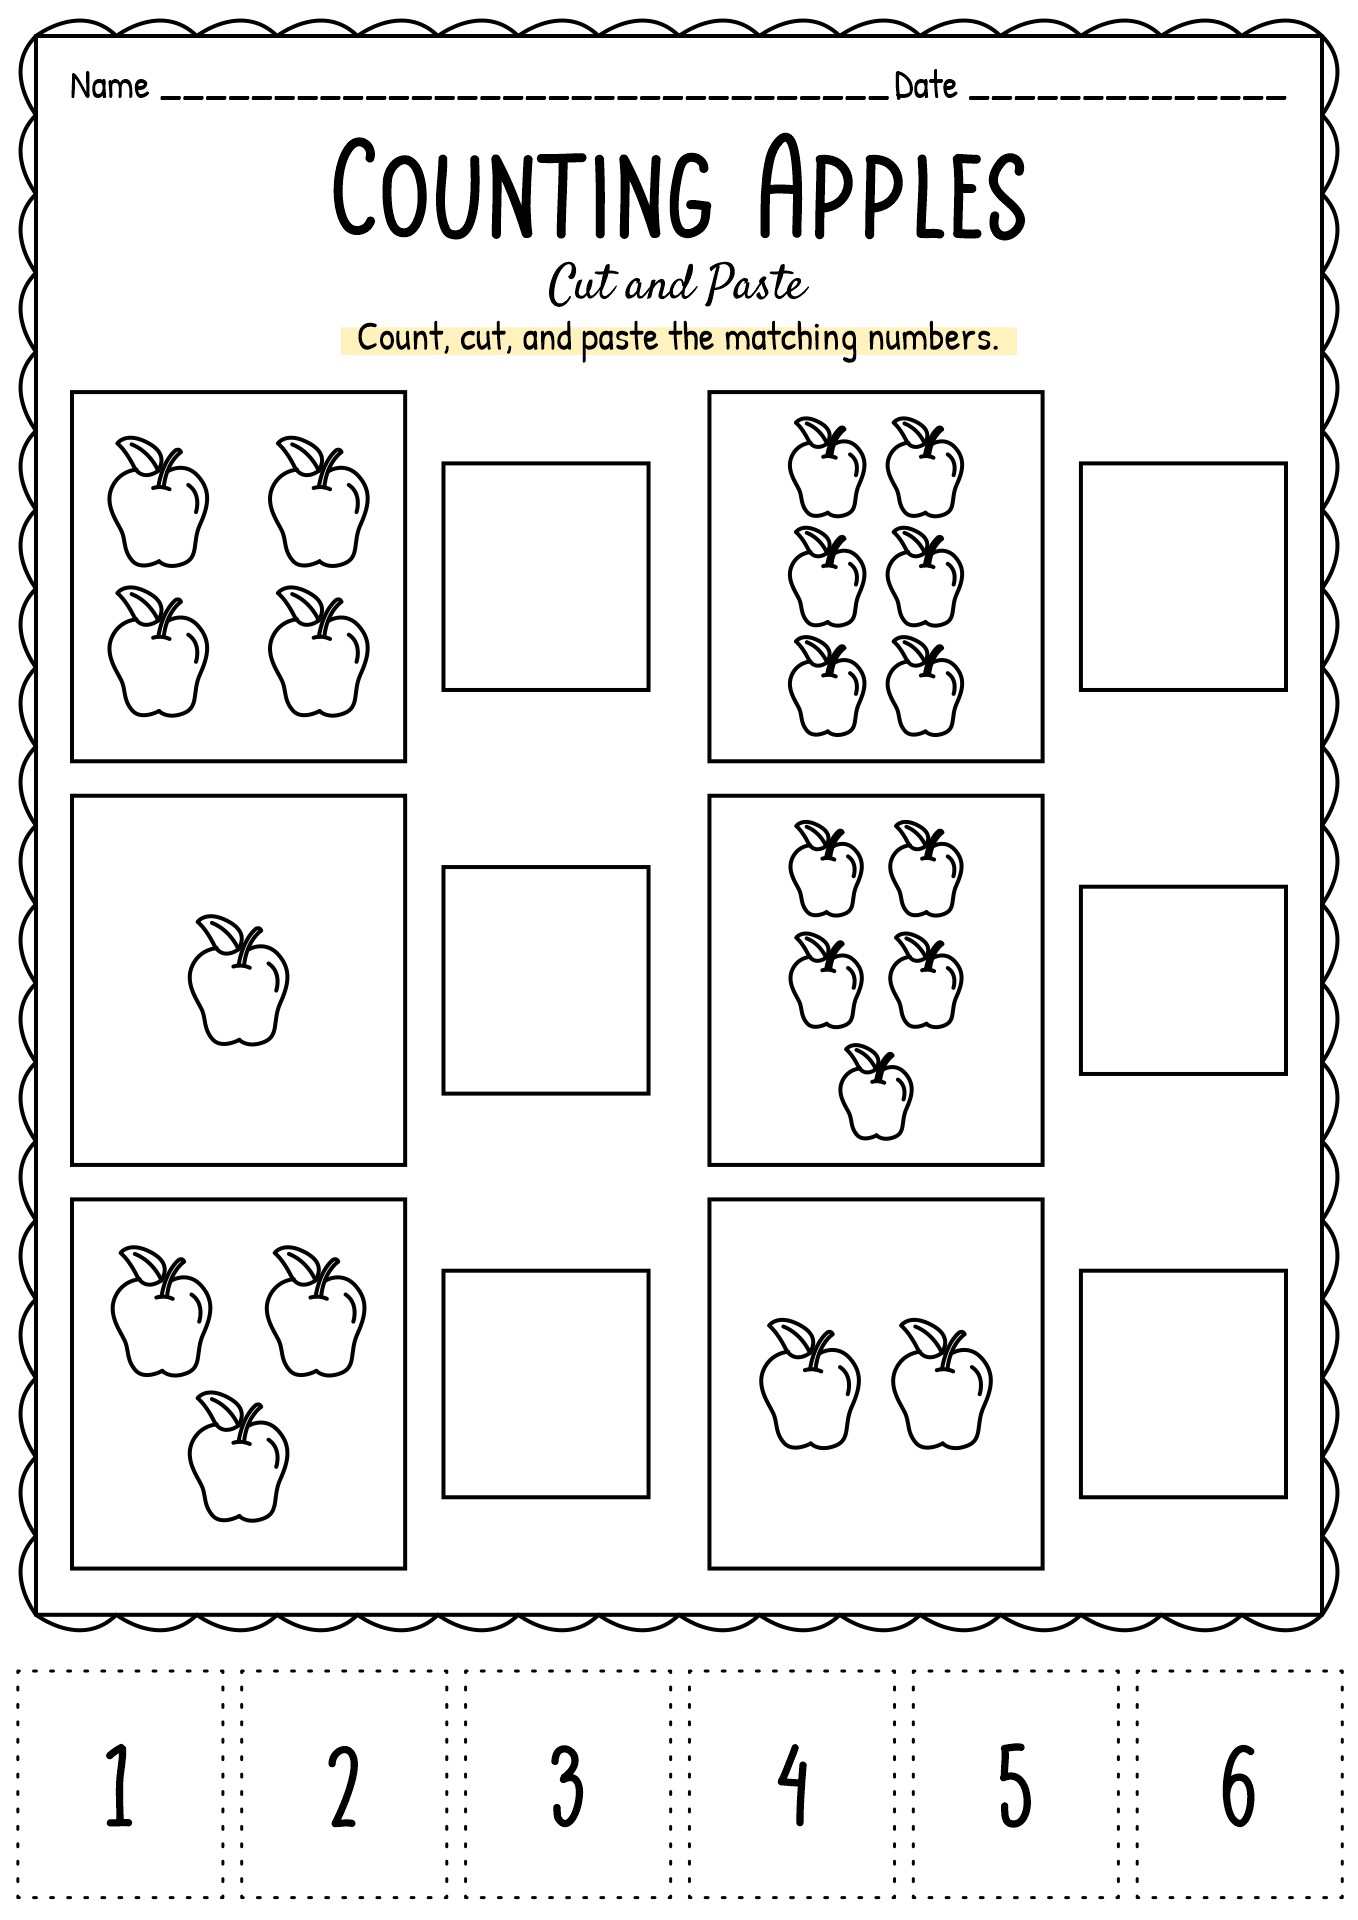 Kindergarten Counting Cut and Paste Image